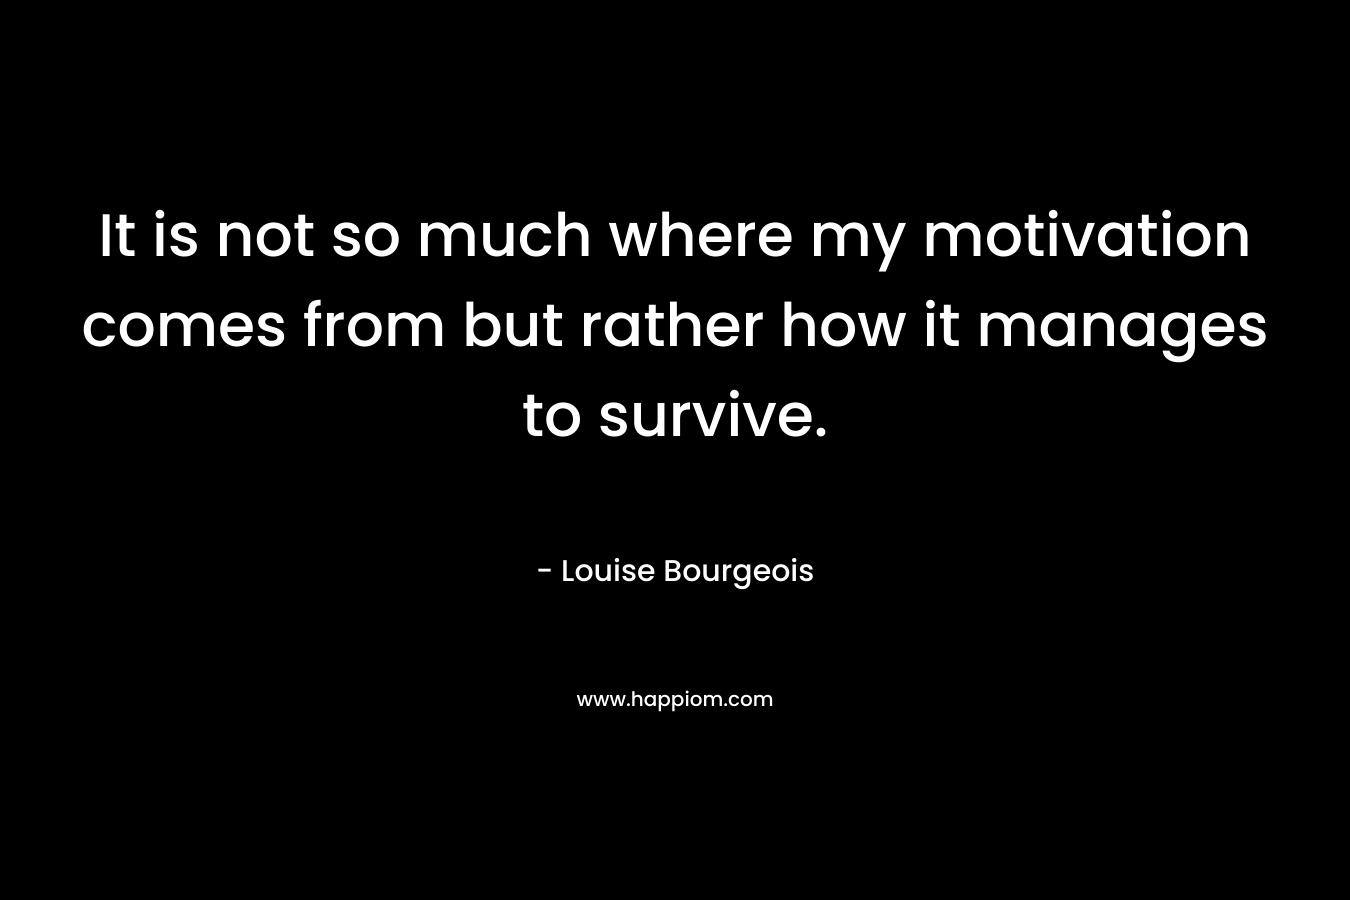 It is not so much where my motivation comes from but rather how it manages to survive. – Louise Bourgeois